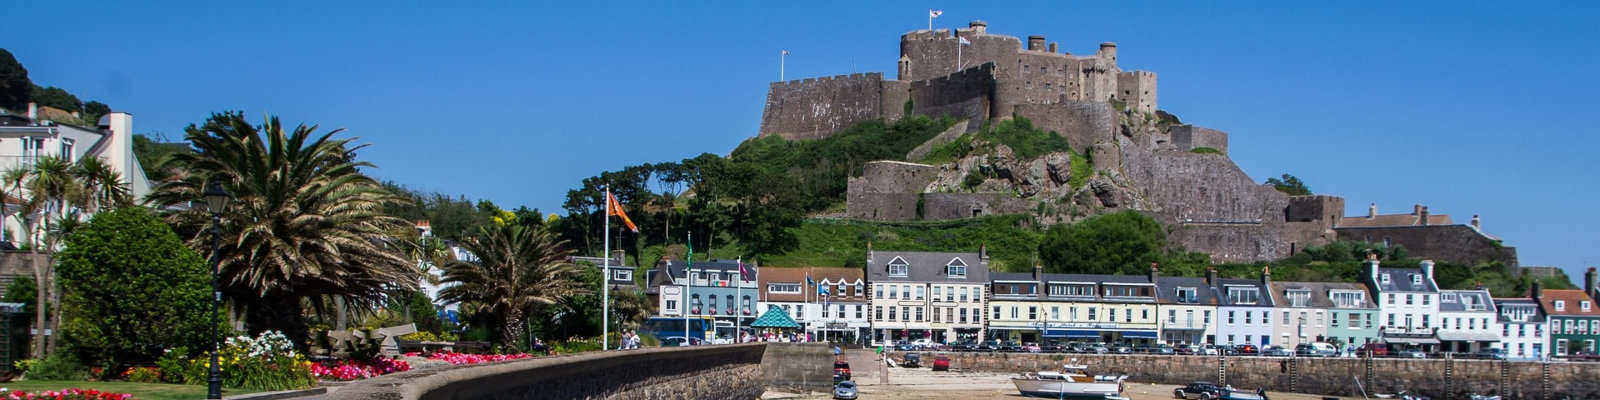 Gorey on the island of Jersey